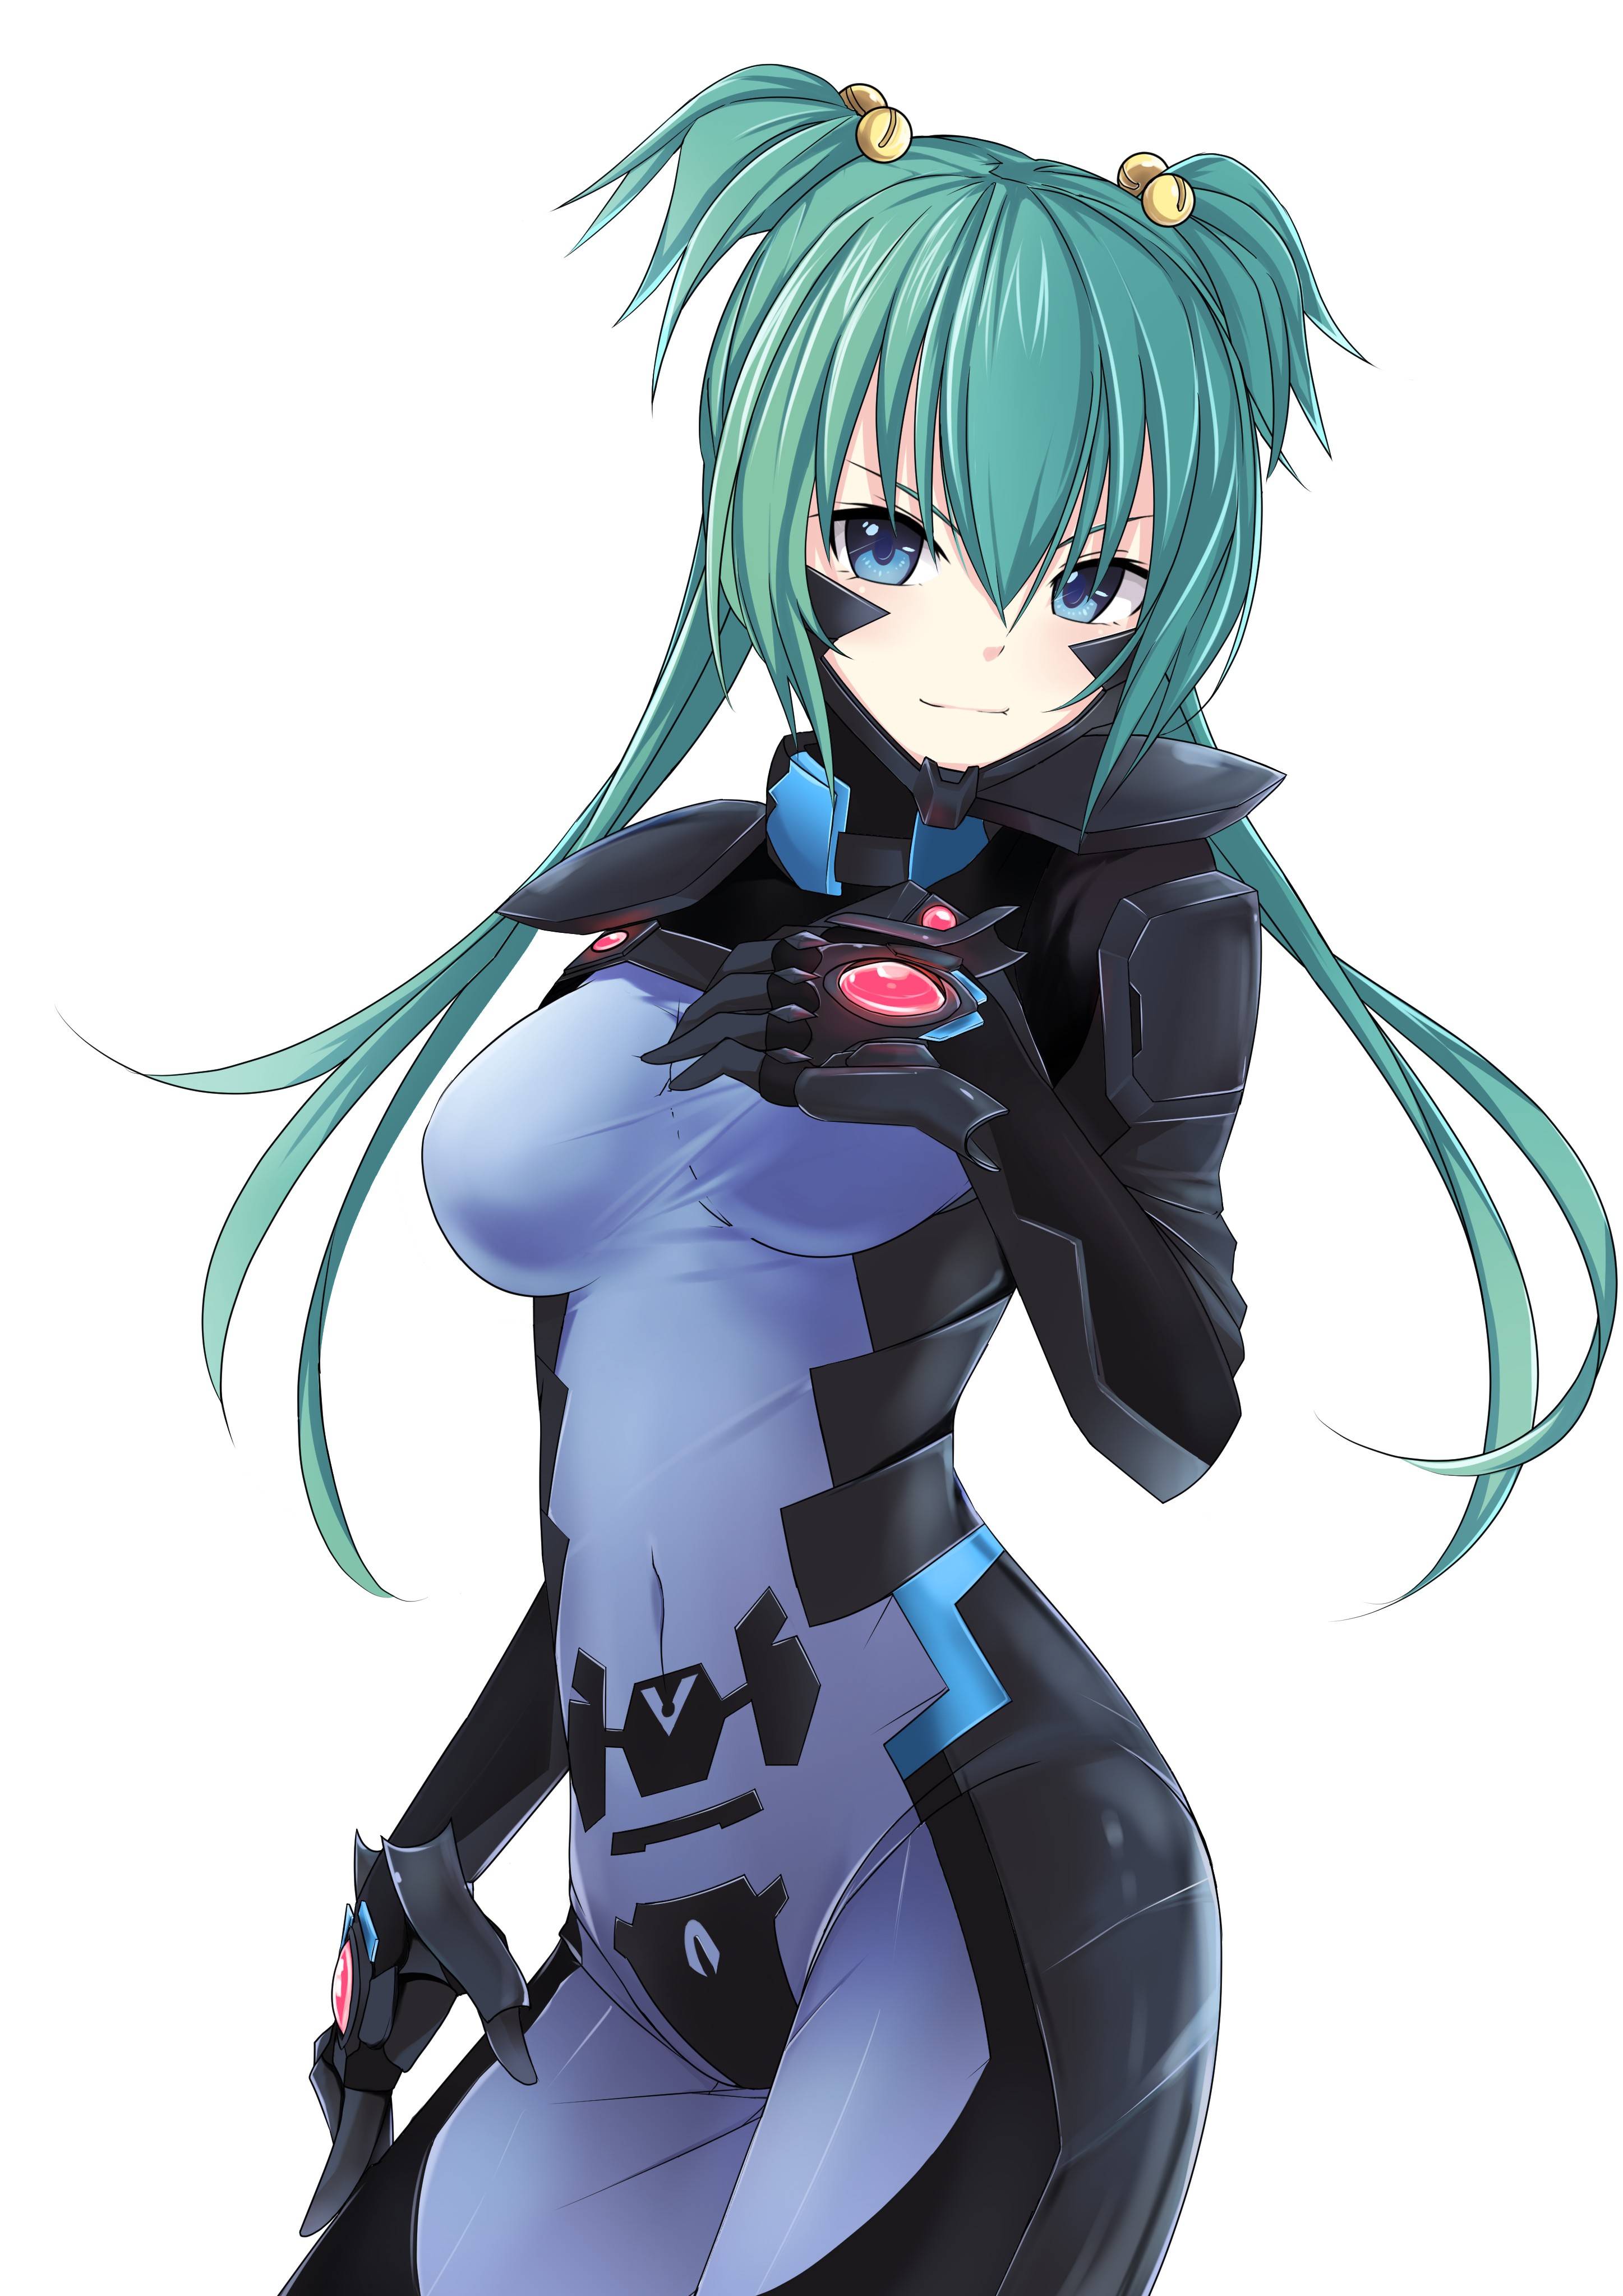 Anime 2894x4093 anime anime girls happiness Cui Yifei bodysuit long hair cyan hair blue eyes twintails Muv-Luv Muv-Luv Alternative: Total Eclipse